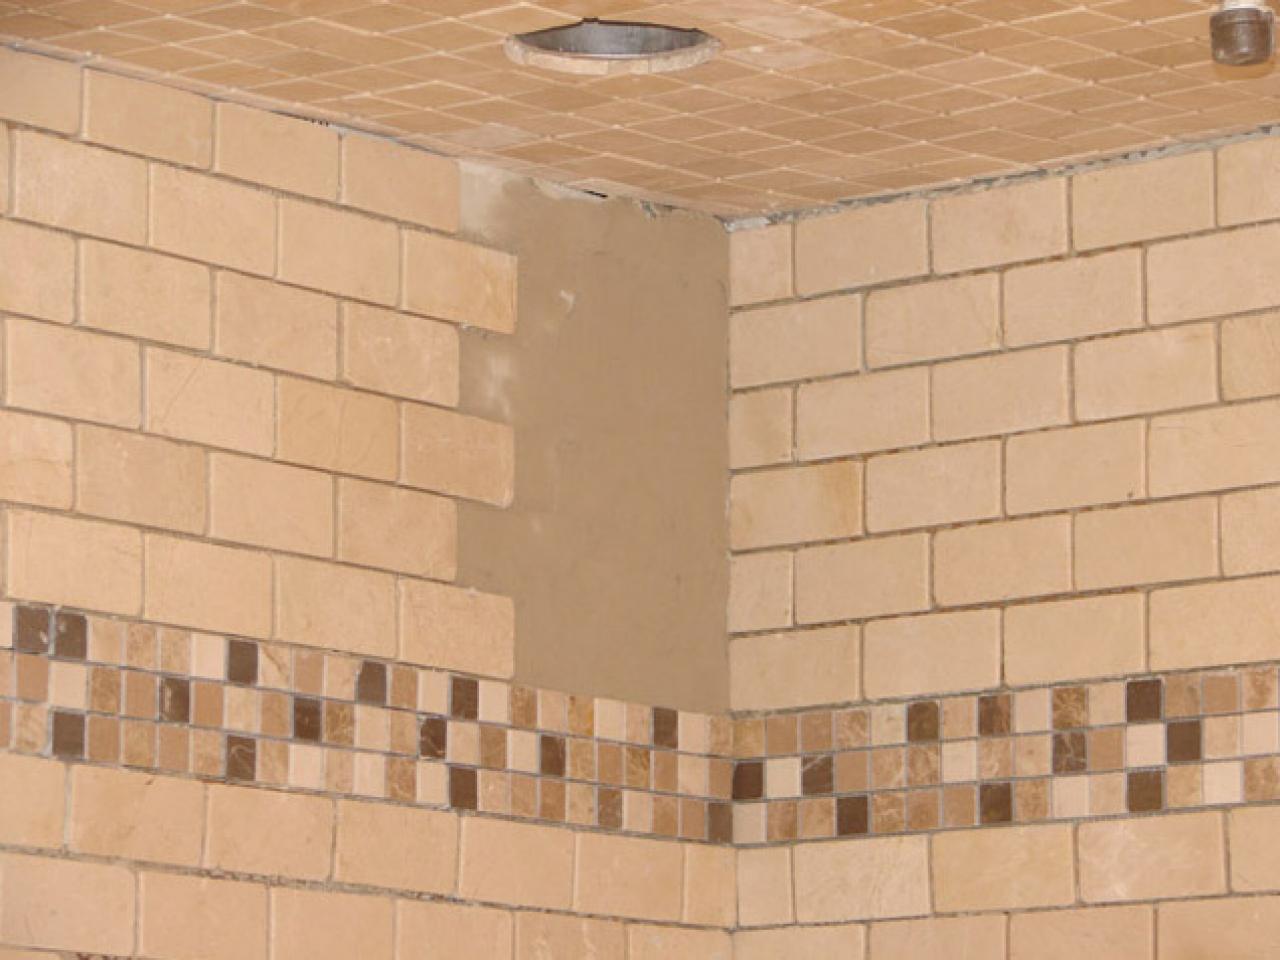 Install Tile In A Bathroom Shower, How To Install Bathroom Shower Wall Tile